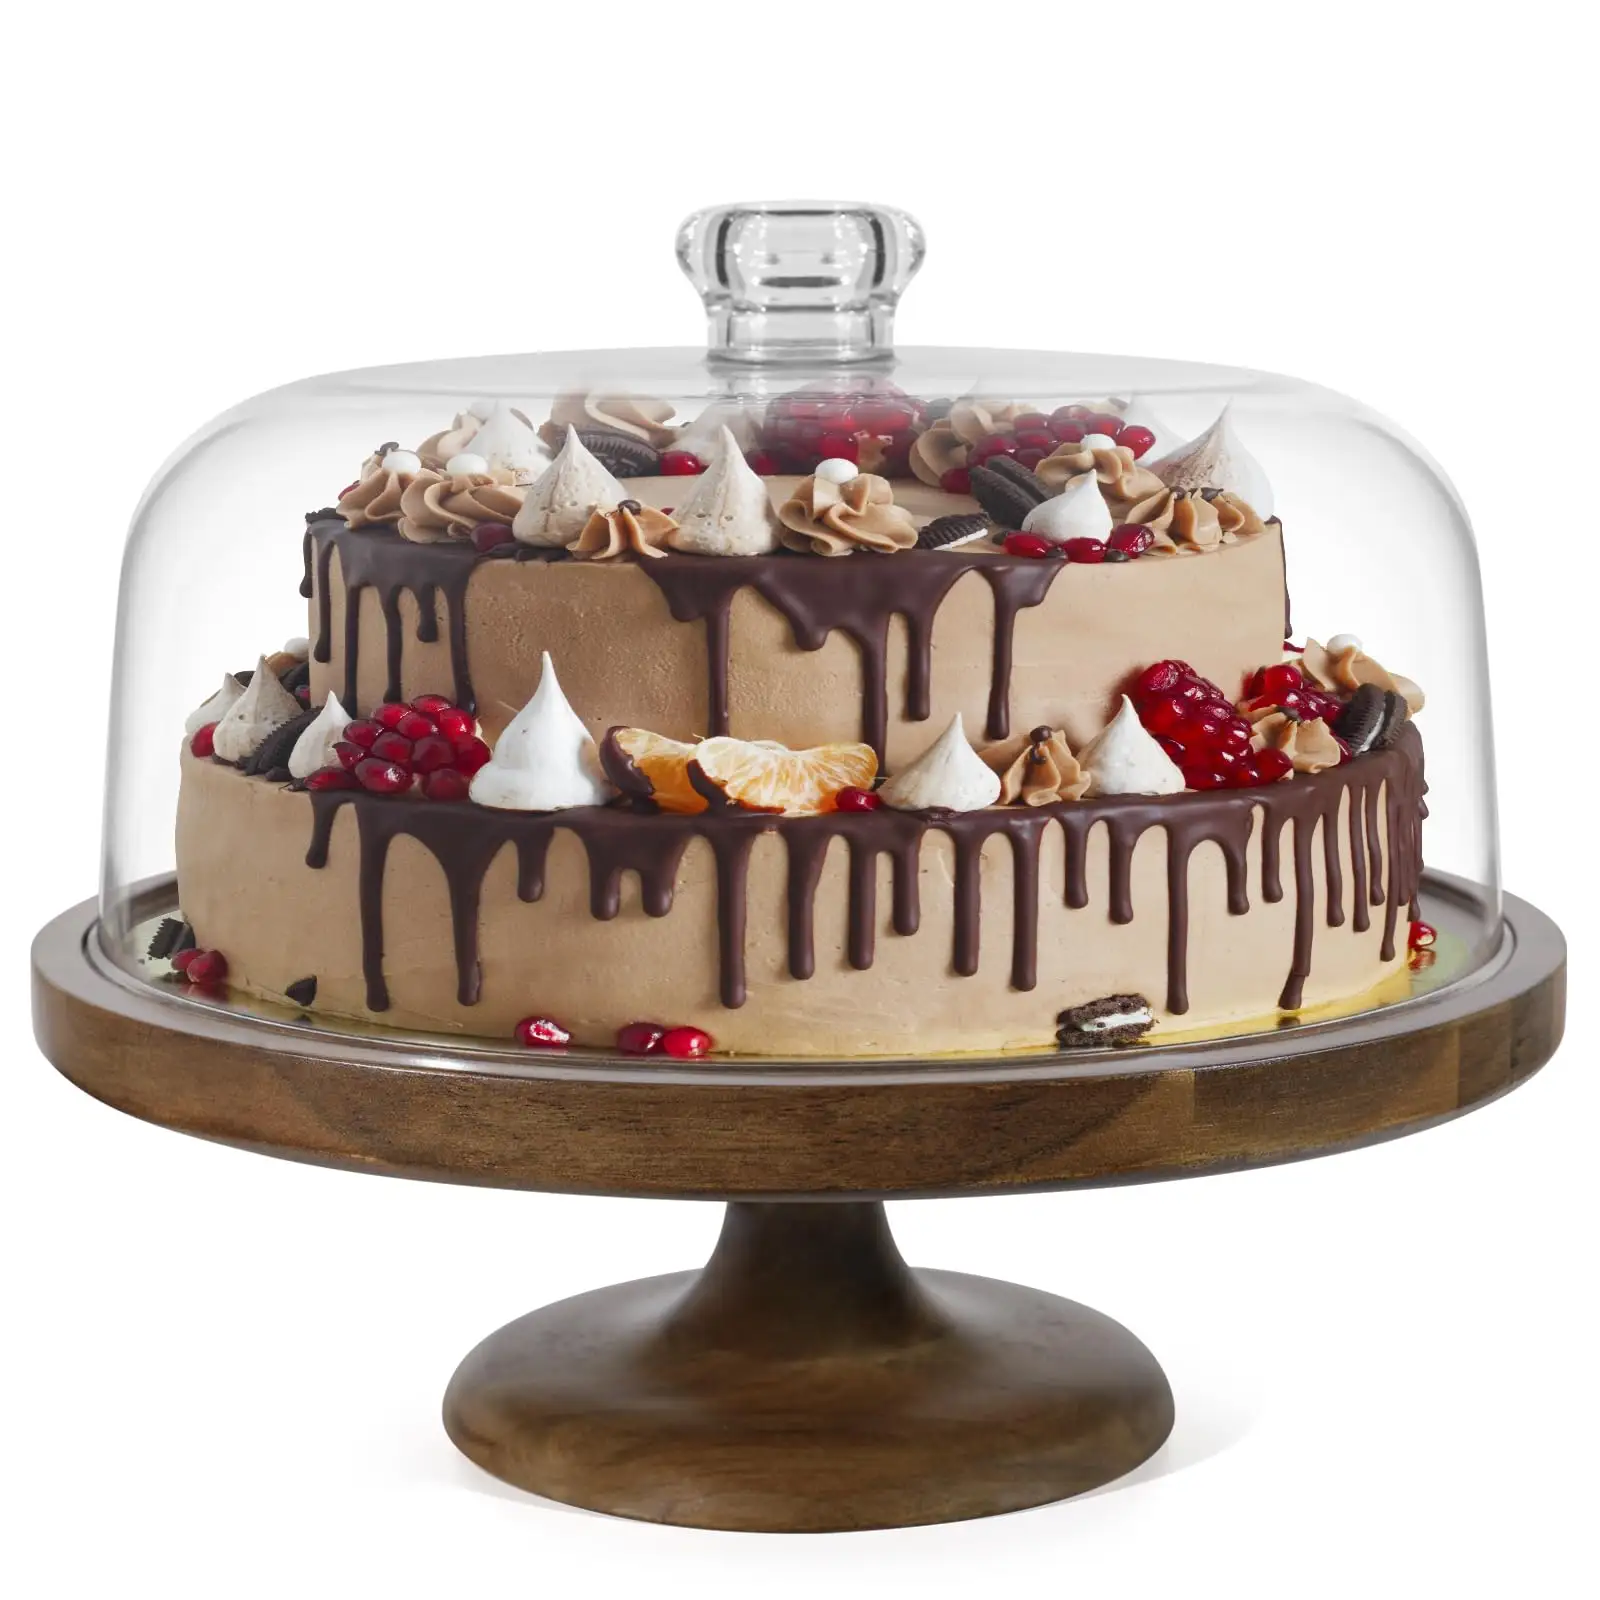 Cake Stand with Clear Acrylic Dome Lid Wood Cake Stand Cake Display Server Tray Kitchen Birthday Parties Weddings Baking Gifts